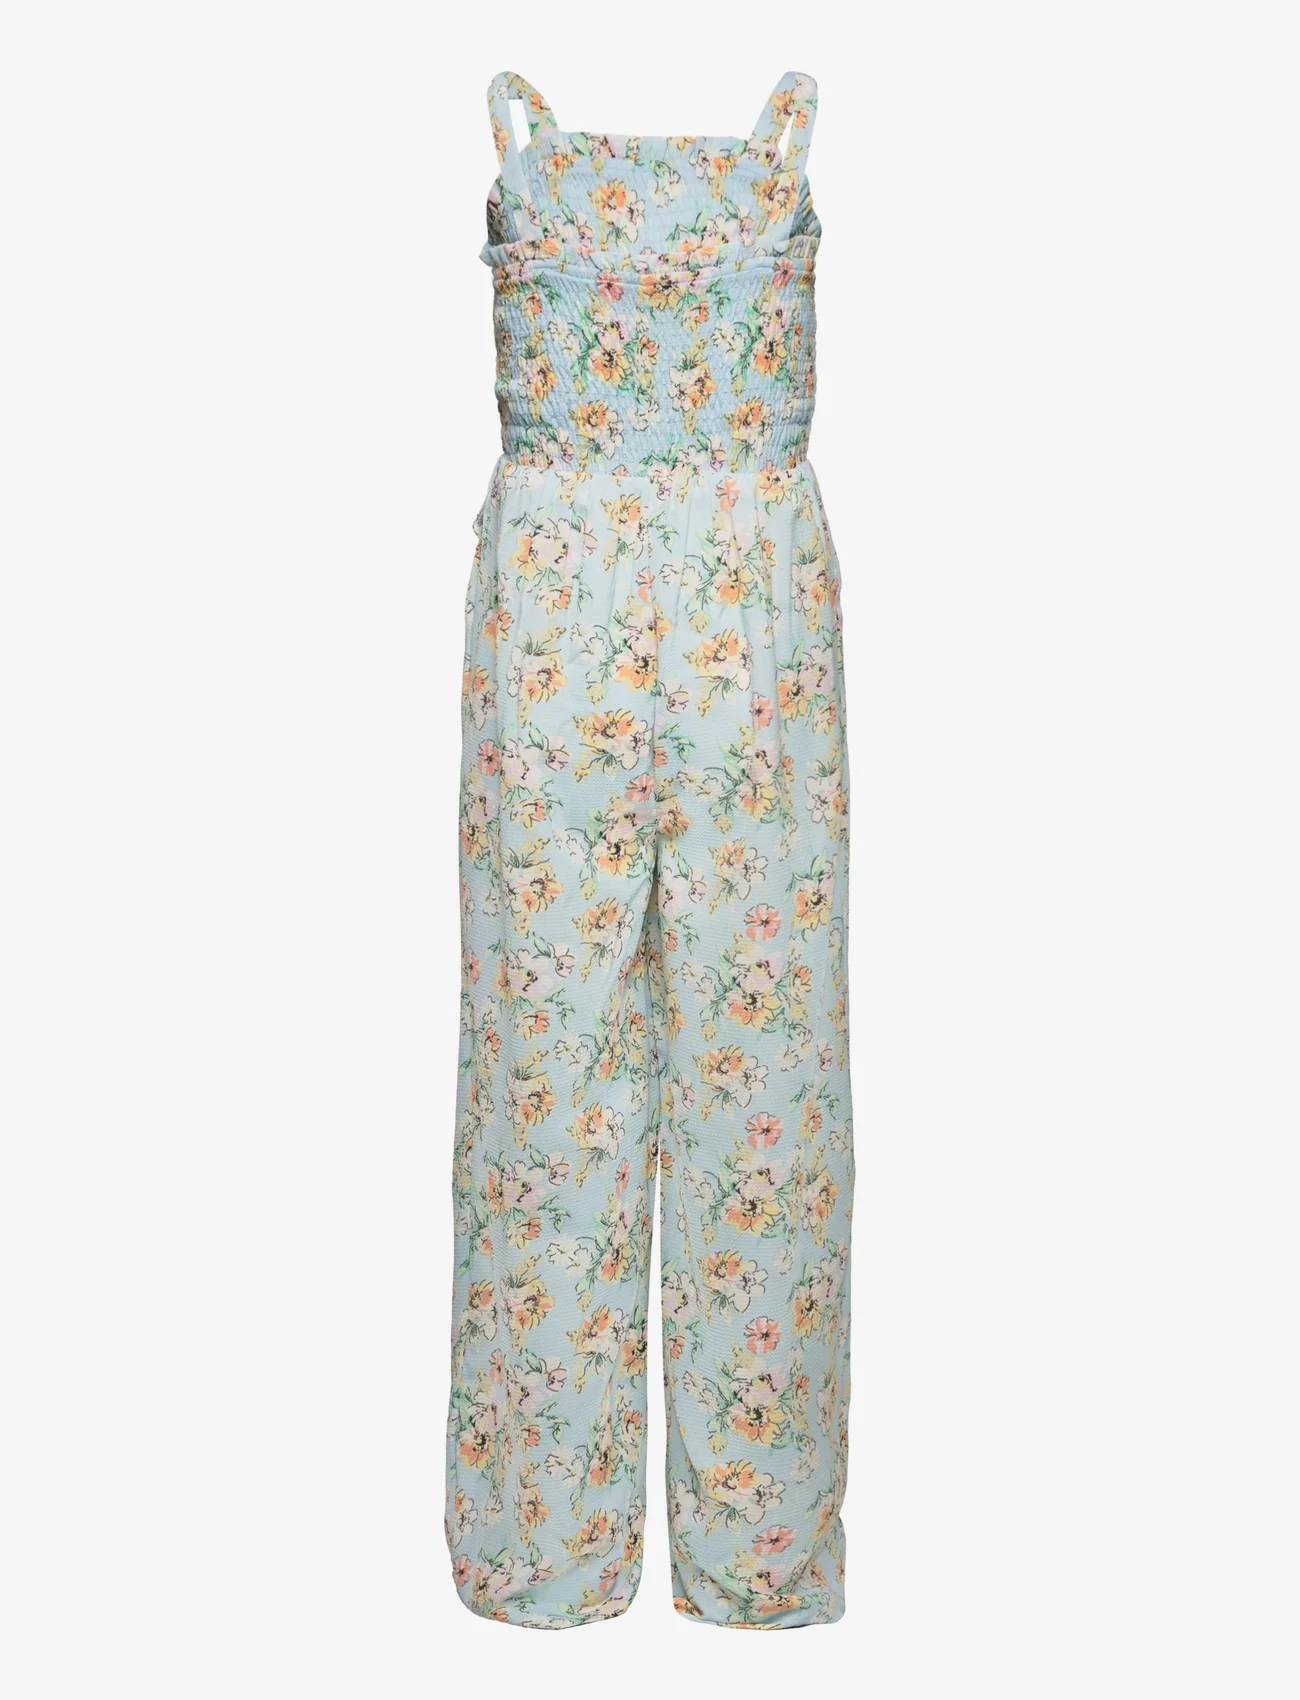 LMTD - NLFHICALI JUMPSUIT - lowest prices - nantucket breeze - 1